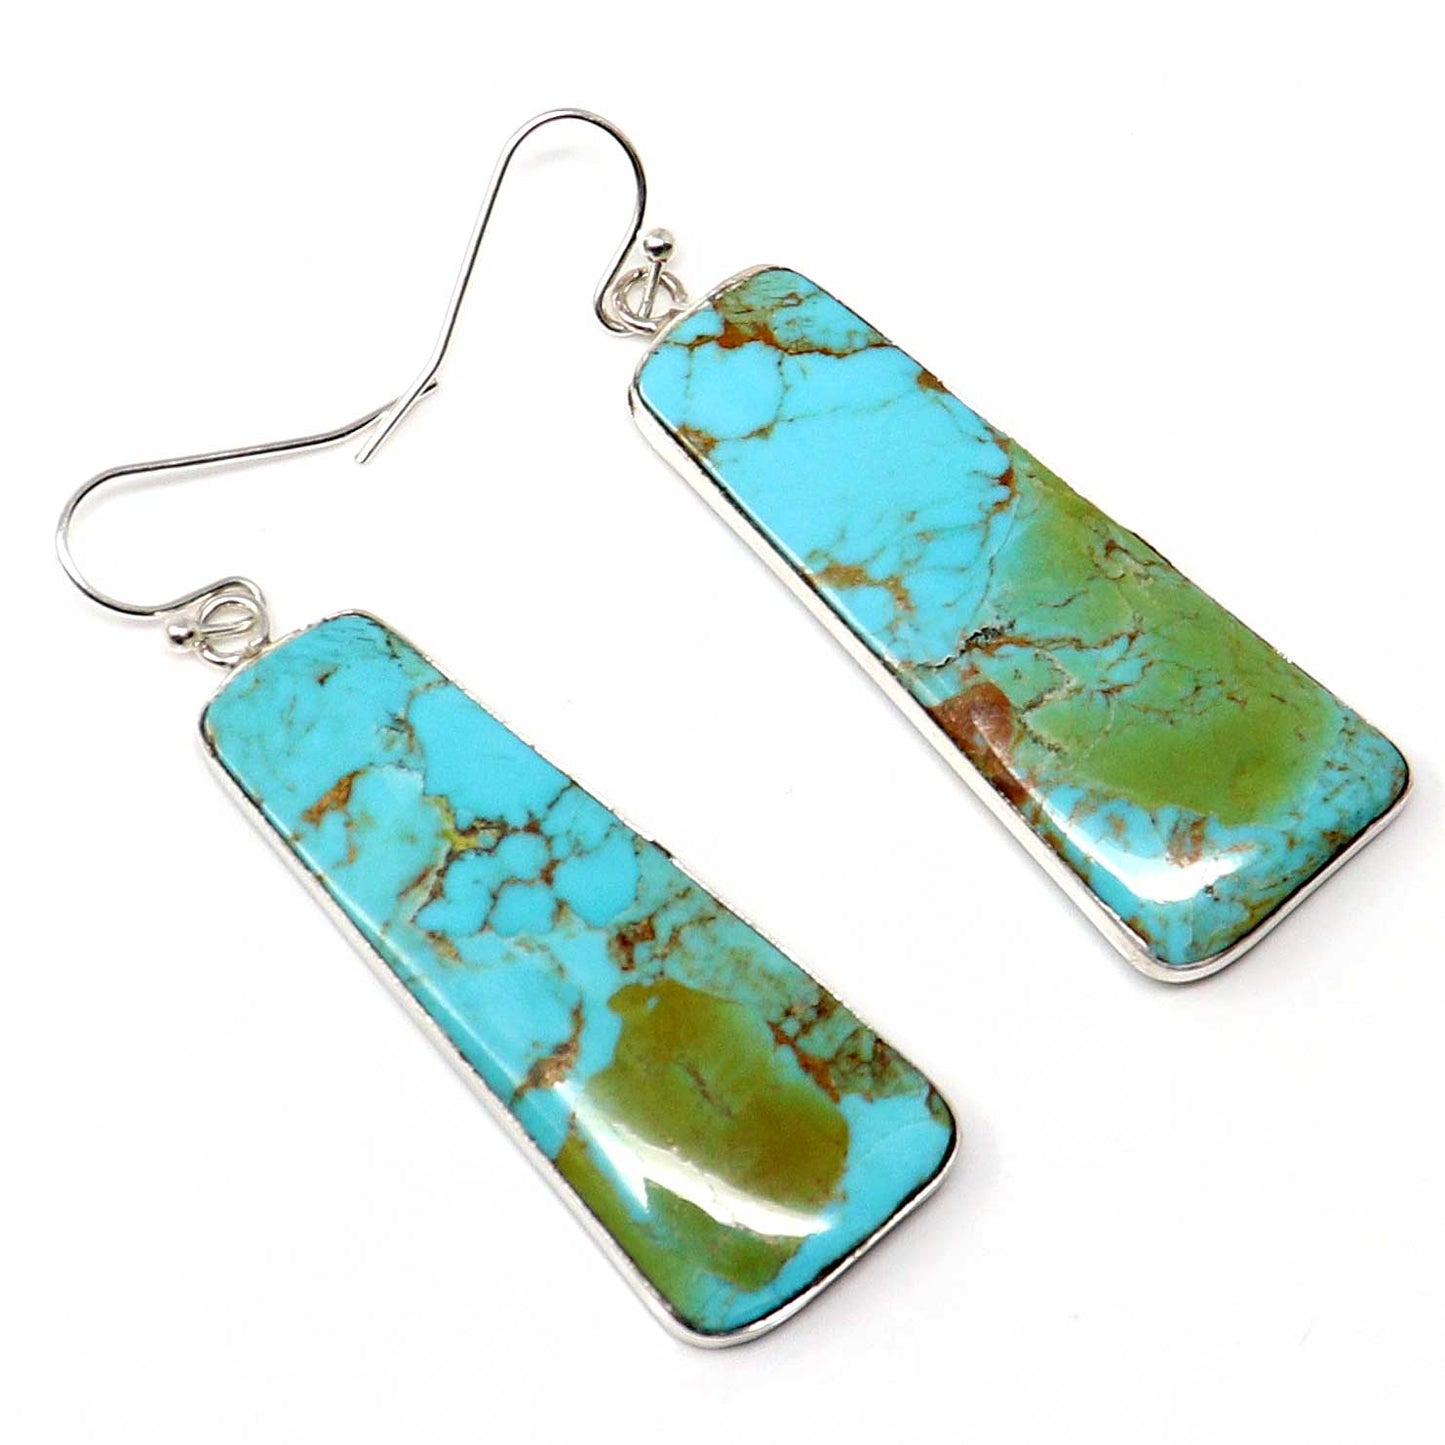 Turquoise & Silver Trapezoid Drop Earrings by Tortalita